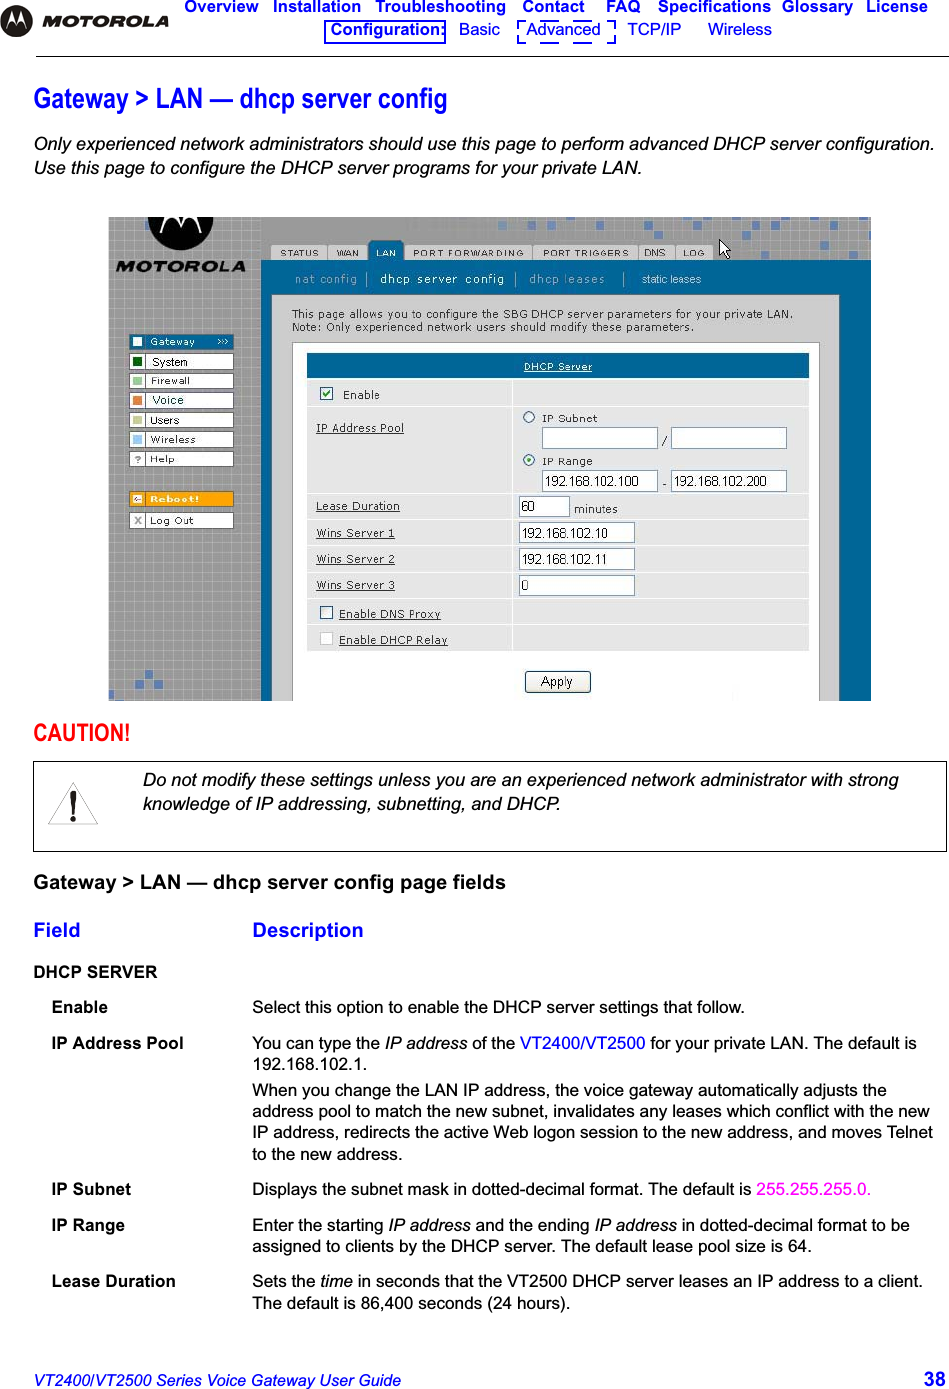 VT2400/VT2500 Series Voice Gateway User Guide 38Overview Installation Troubleshooting Contact FAQ Specifications Glossary LicenseConfiguration:   Basic      Advanced      TCP/IP      Wireless Gateway &gt; LAN — dhcp server configOnly experienced network administrators should use this page to perform advanced DHCP server configuration. Use this page to configure the DHCP server programs for your private LAN.CAUTION!Do not modify these settings unless you are an experienced network administrator with strong knowledge of IP addressing, subnetting, and DHCP.Gateway &gt; LAN — dhcp server config page fieldsField DescriptionDHCP SERVEREnable Select this option to enable the DHCP server settings that follow.IP Address Pool You can type the IP address of the VT2400/VT2500 for your private LAN. The default is 192.168.102.1.When you change the LAN IP address, the voice gateway automatically adjusts the address pool to match the new subnet, invalidates any leases which conflict with the new IP address, redirects the active Web logon session to the new address, and moves Telnet to the new address.IP Subnet Displays the subnet mask in dotted-decimal format. The default is 255.255.255.0.IP Range Enter the starting IP address and the ending IP address in dotted-decimal format to be assigned to clients by the DHCP server. The default lease pool size is 64. Lease Duration Sets the time in seconds that the VT2500 DHCP server leases an IP address to a client. The default is 86,400 seconds (24 hours).